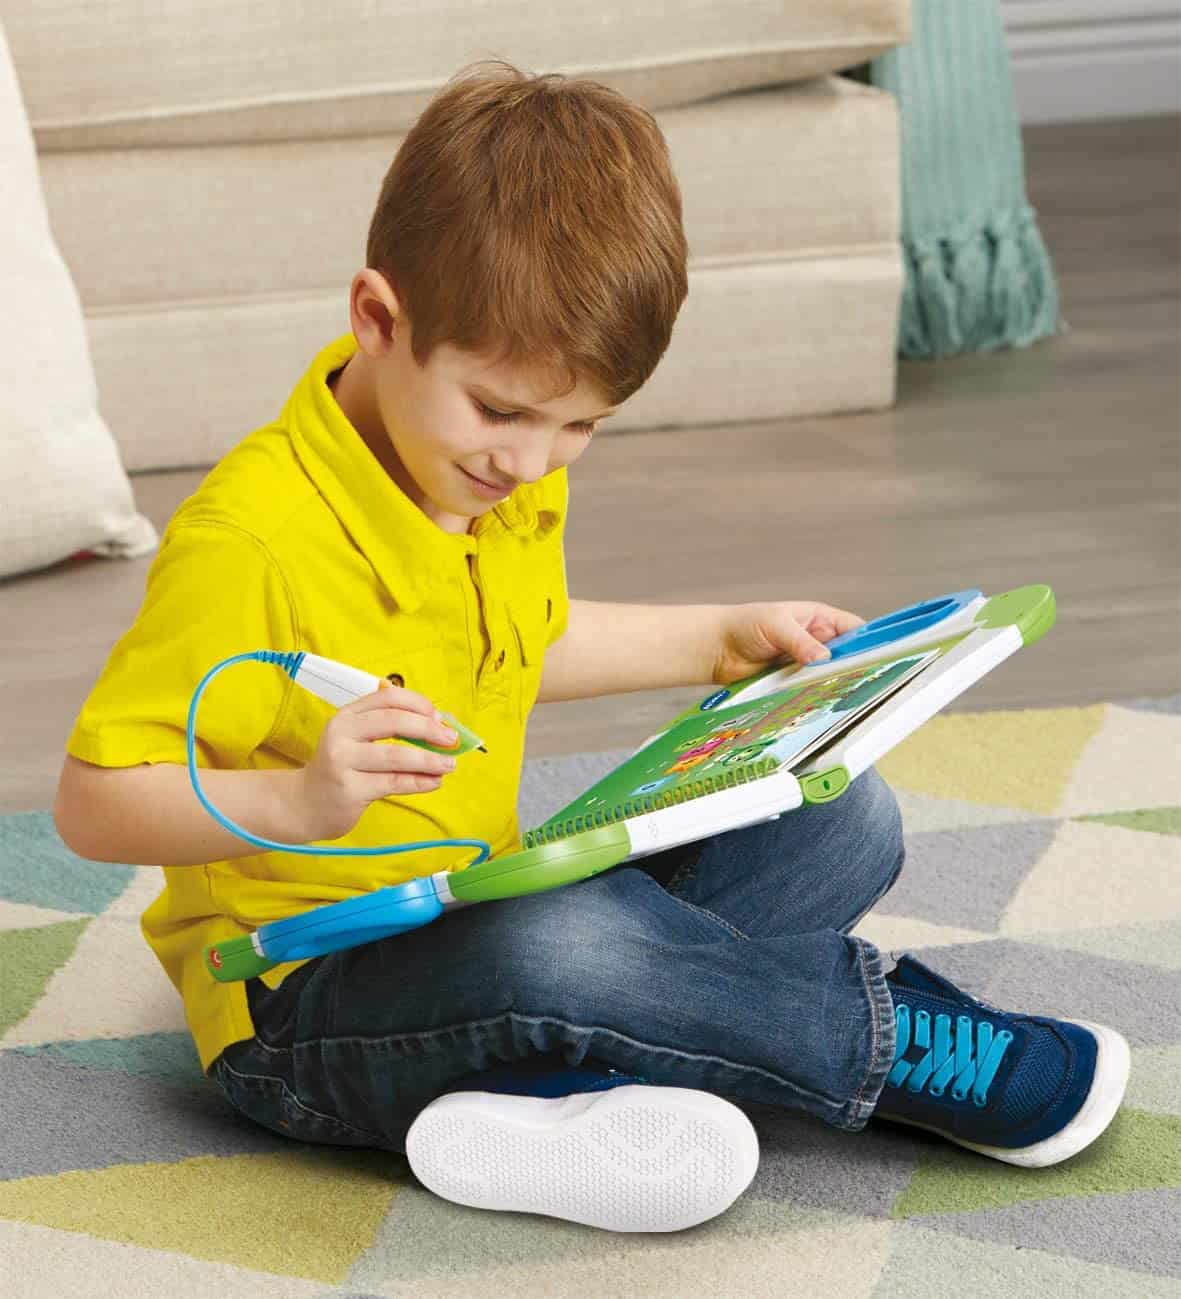 Best interactive learning system: VTech MagiBook